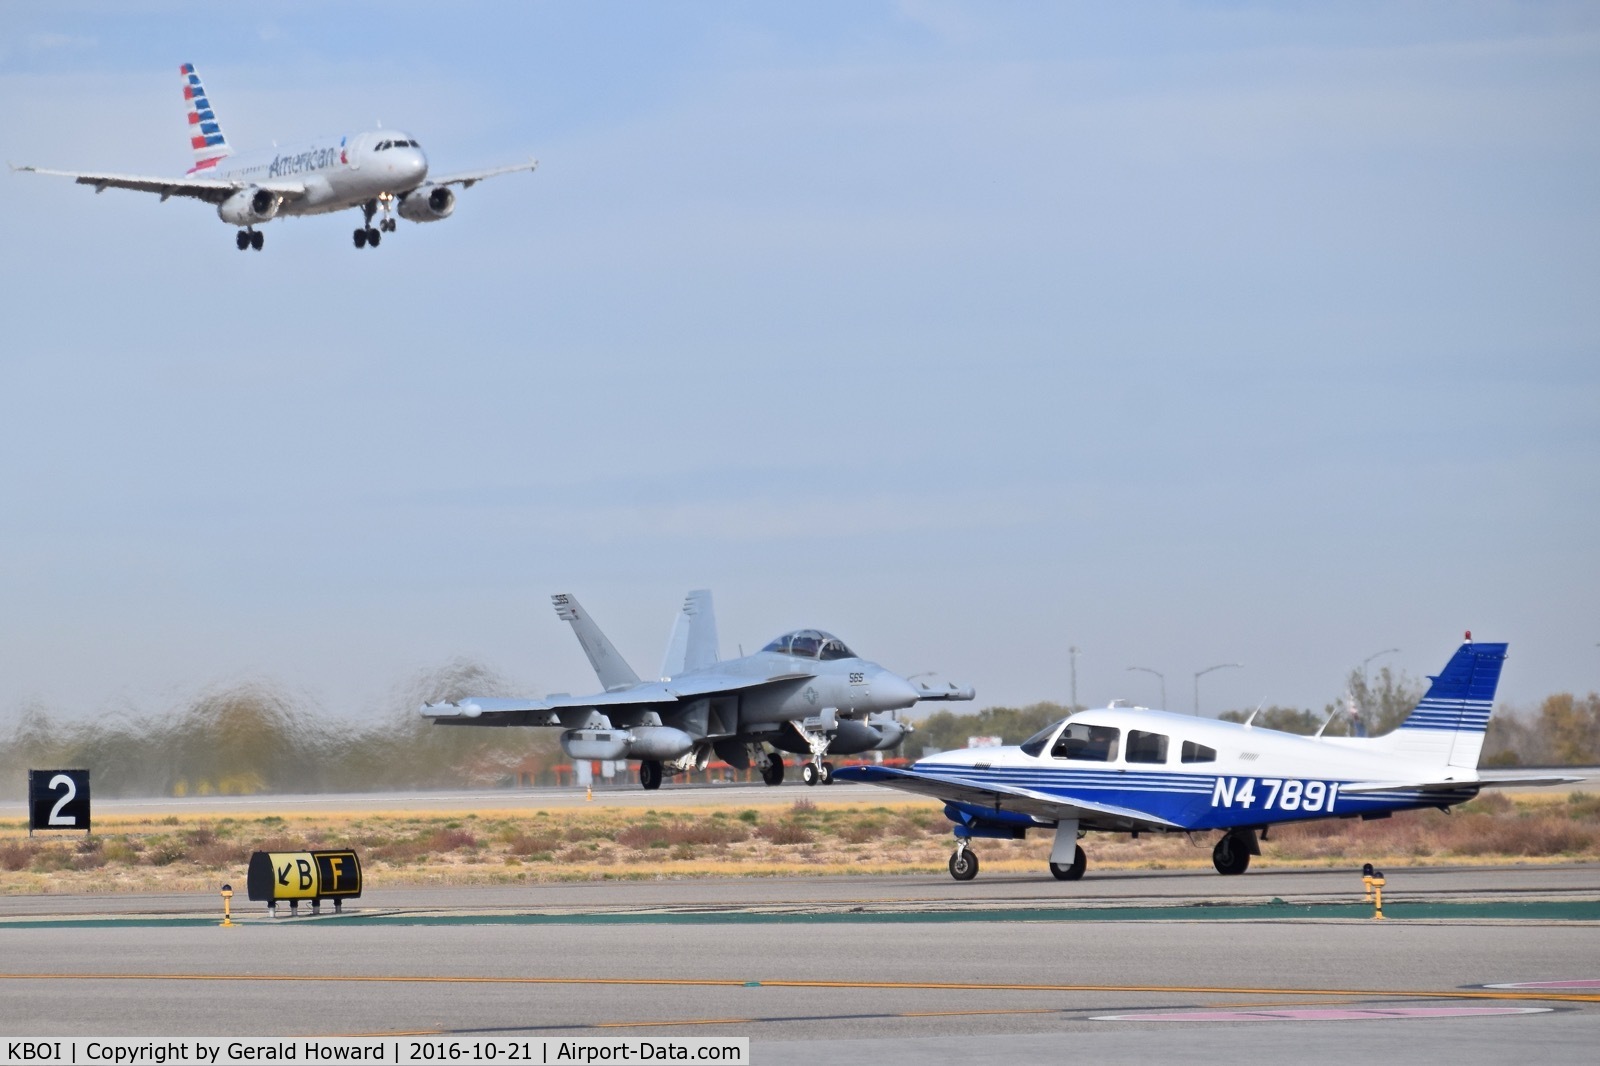 Boise Air Terminal/gowen Fld Airport (BOI) - A Piper on Taxiway Foxtrot while an EA-18G takes off on RWY 10R and American Airlines lands on RWY 10L.